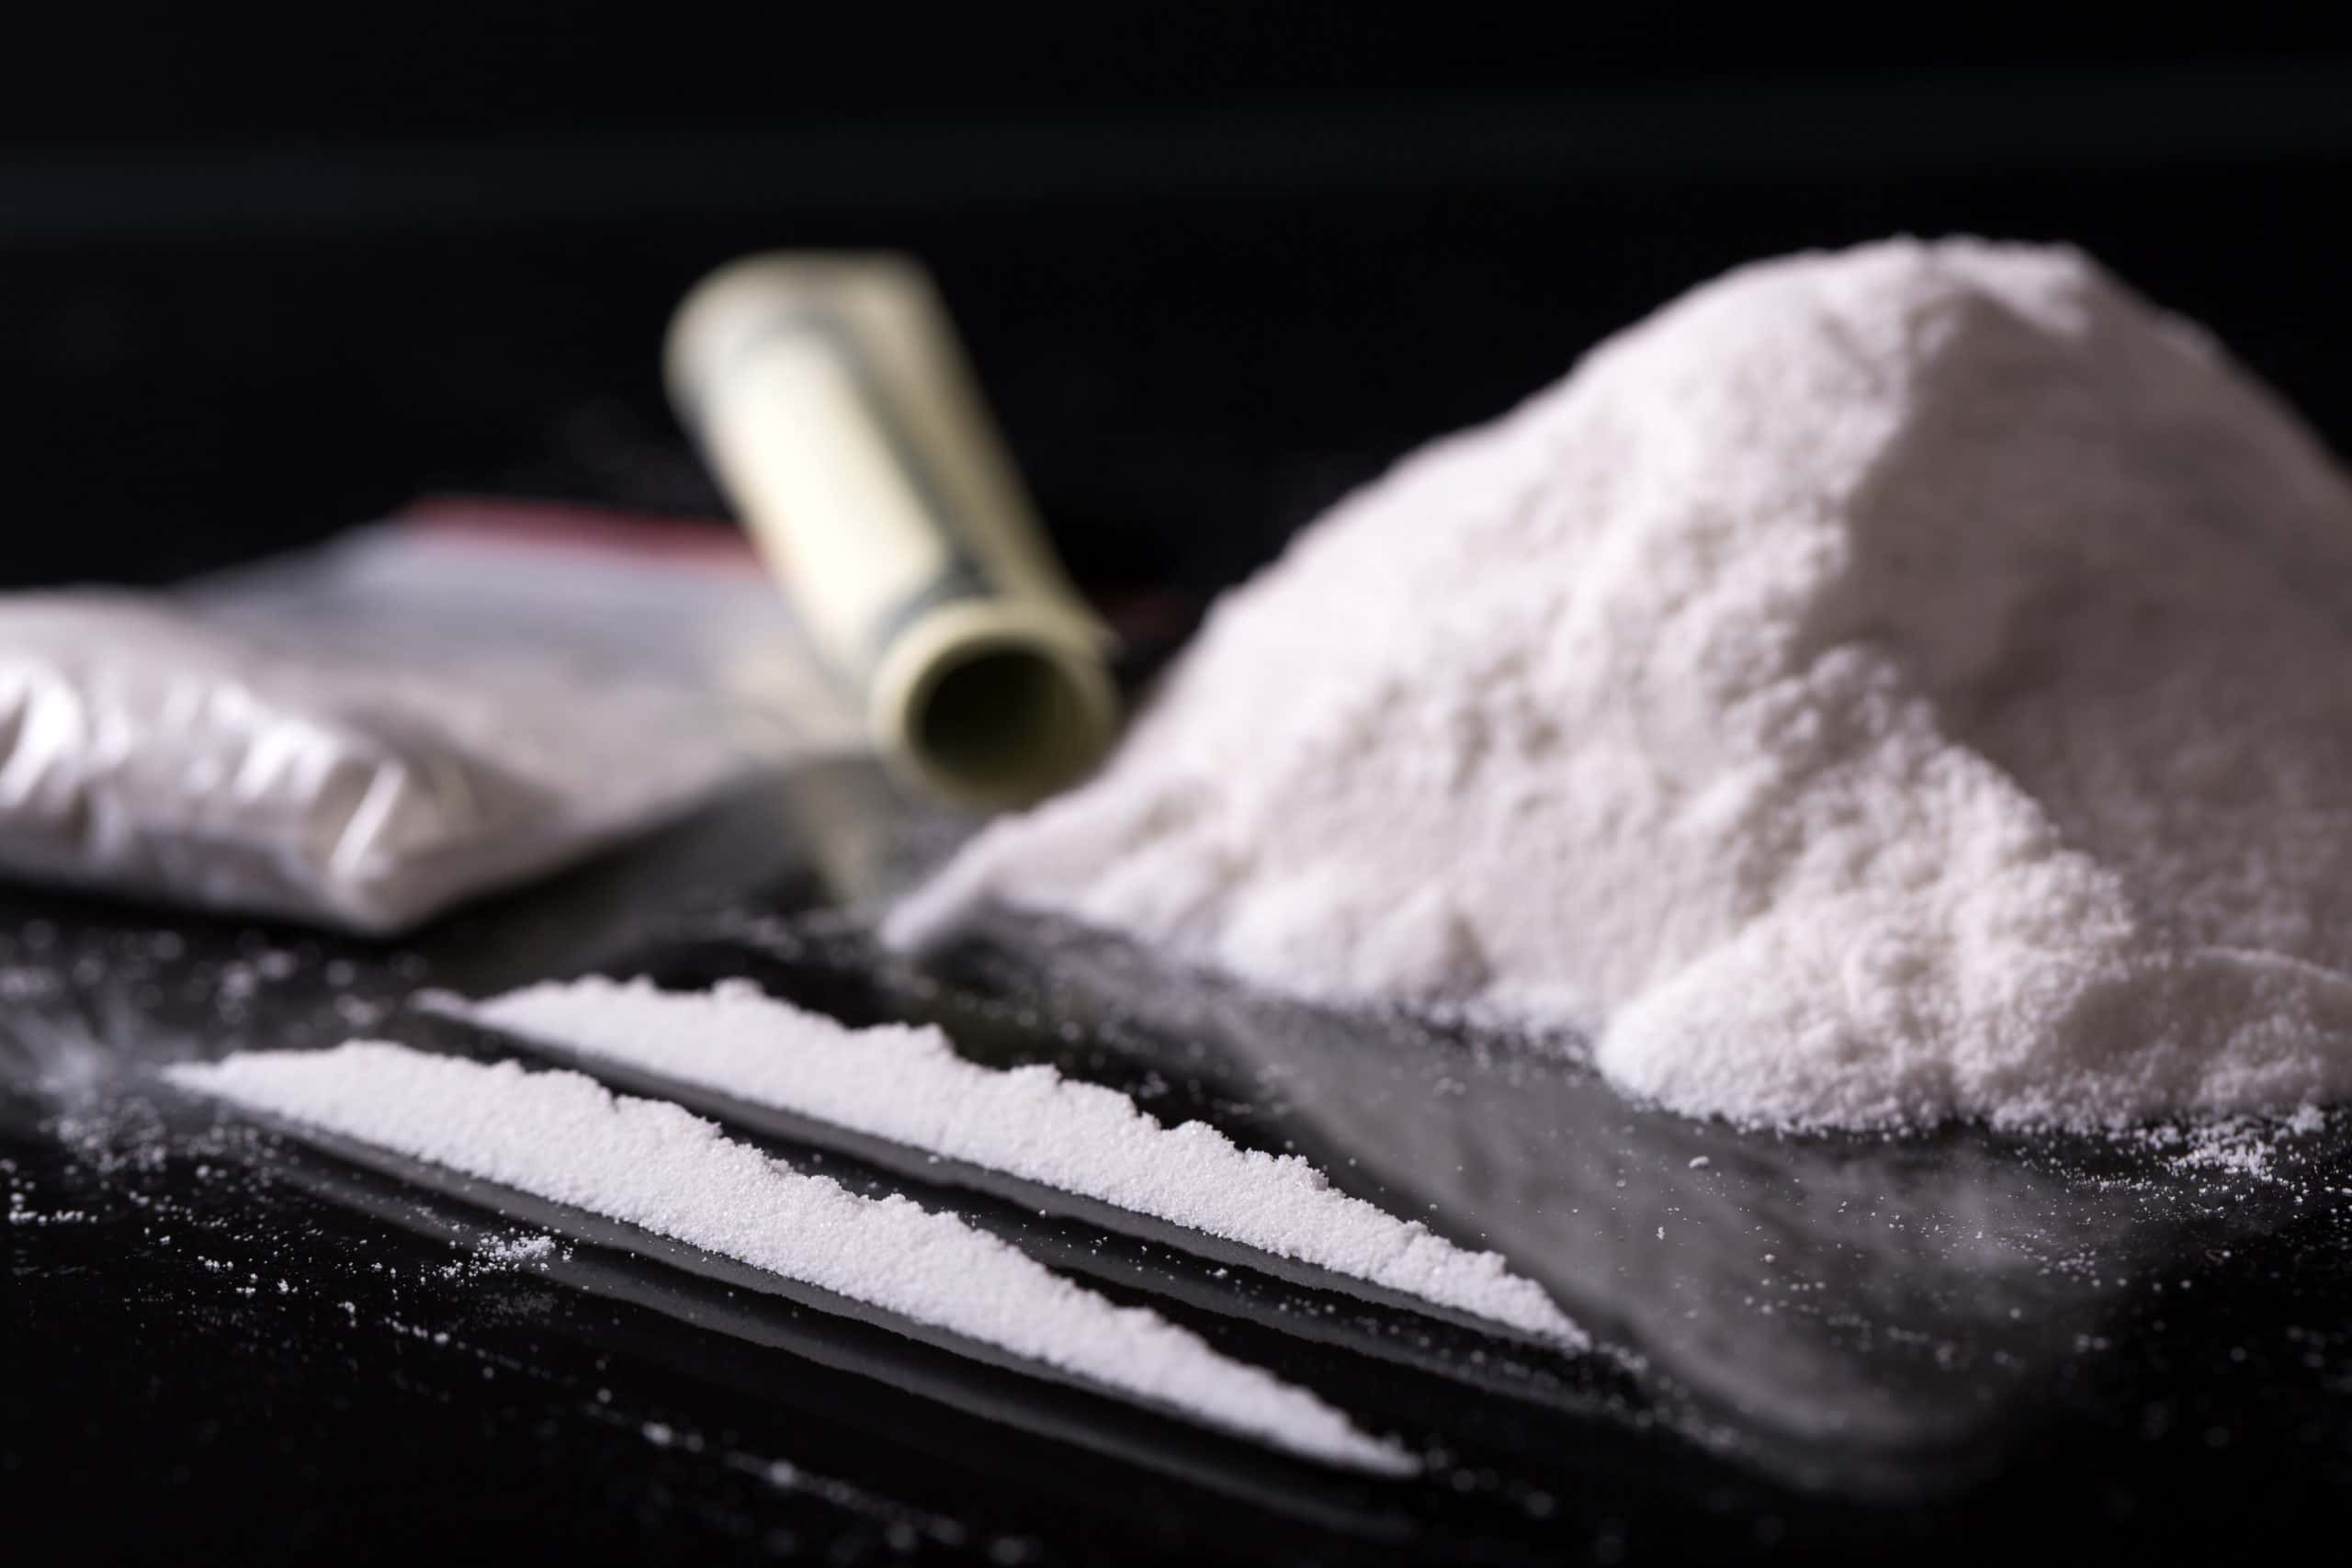 Although they may seem the same, crack and cocaine are different. Read more about the difference between crack cocaine and cocaine.